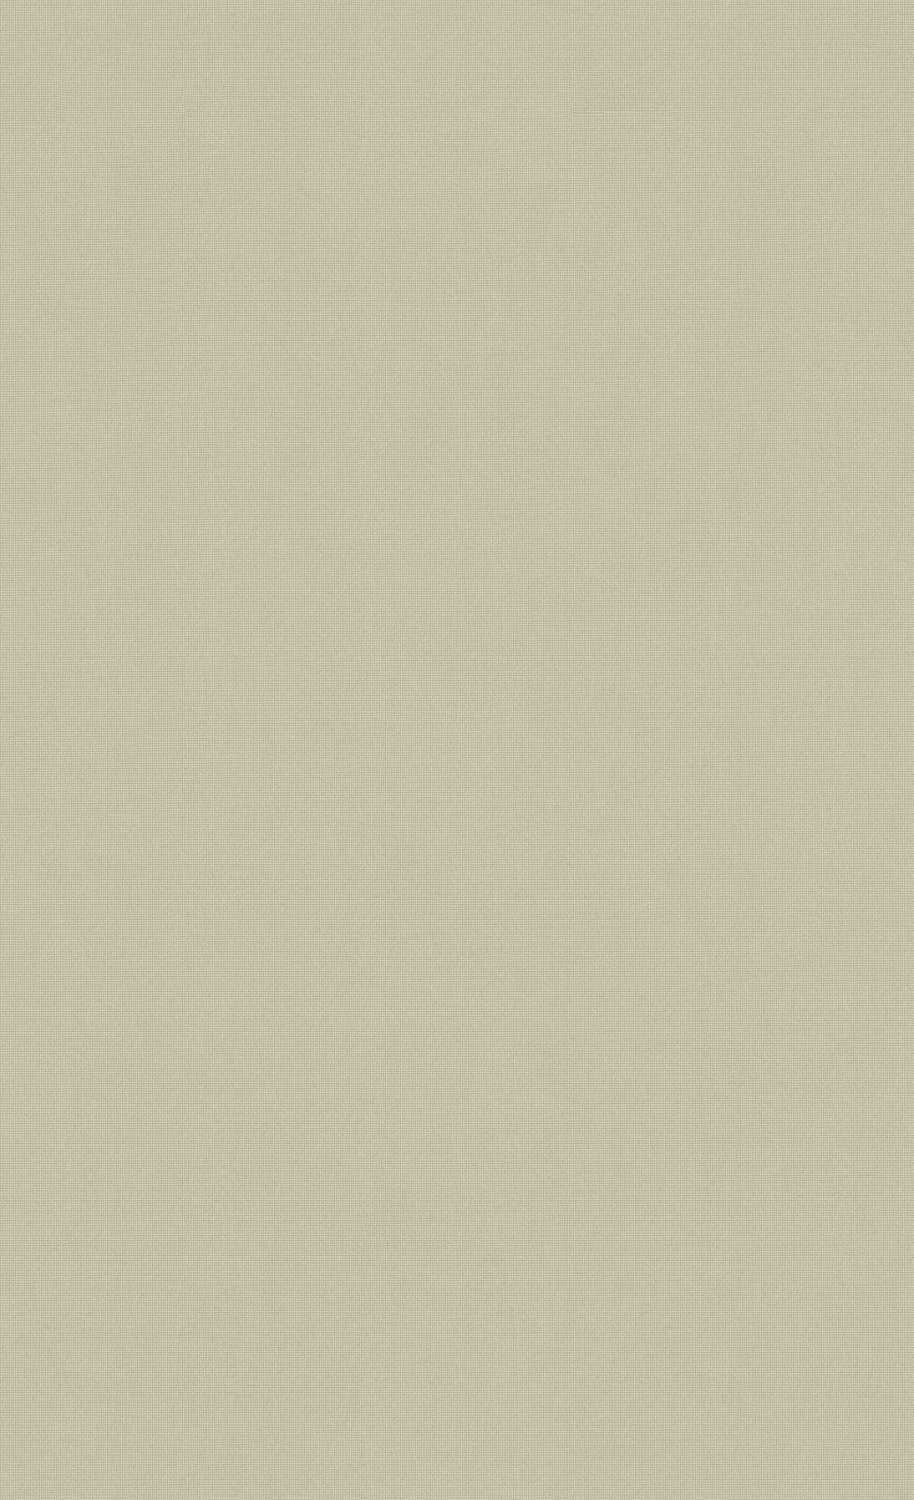 Minimalist Smoke Gray Wallpaper C7289. Commercial and Hospitality